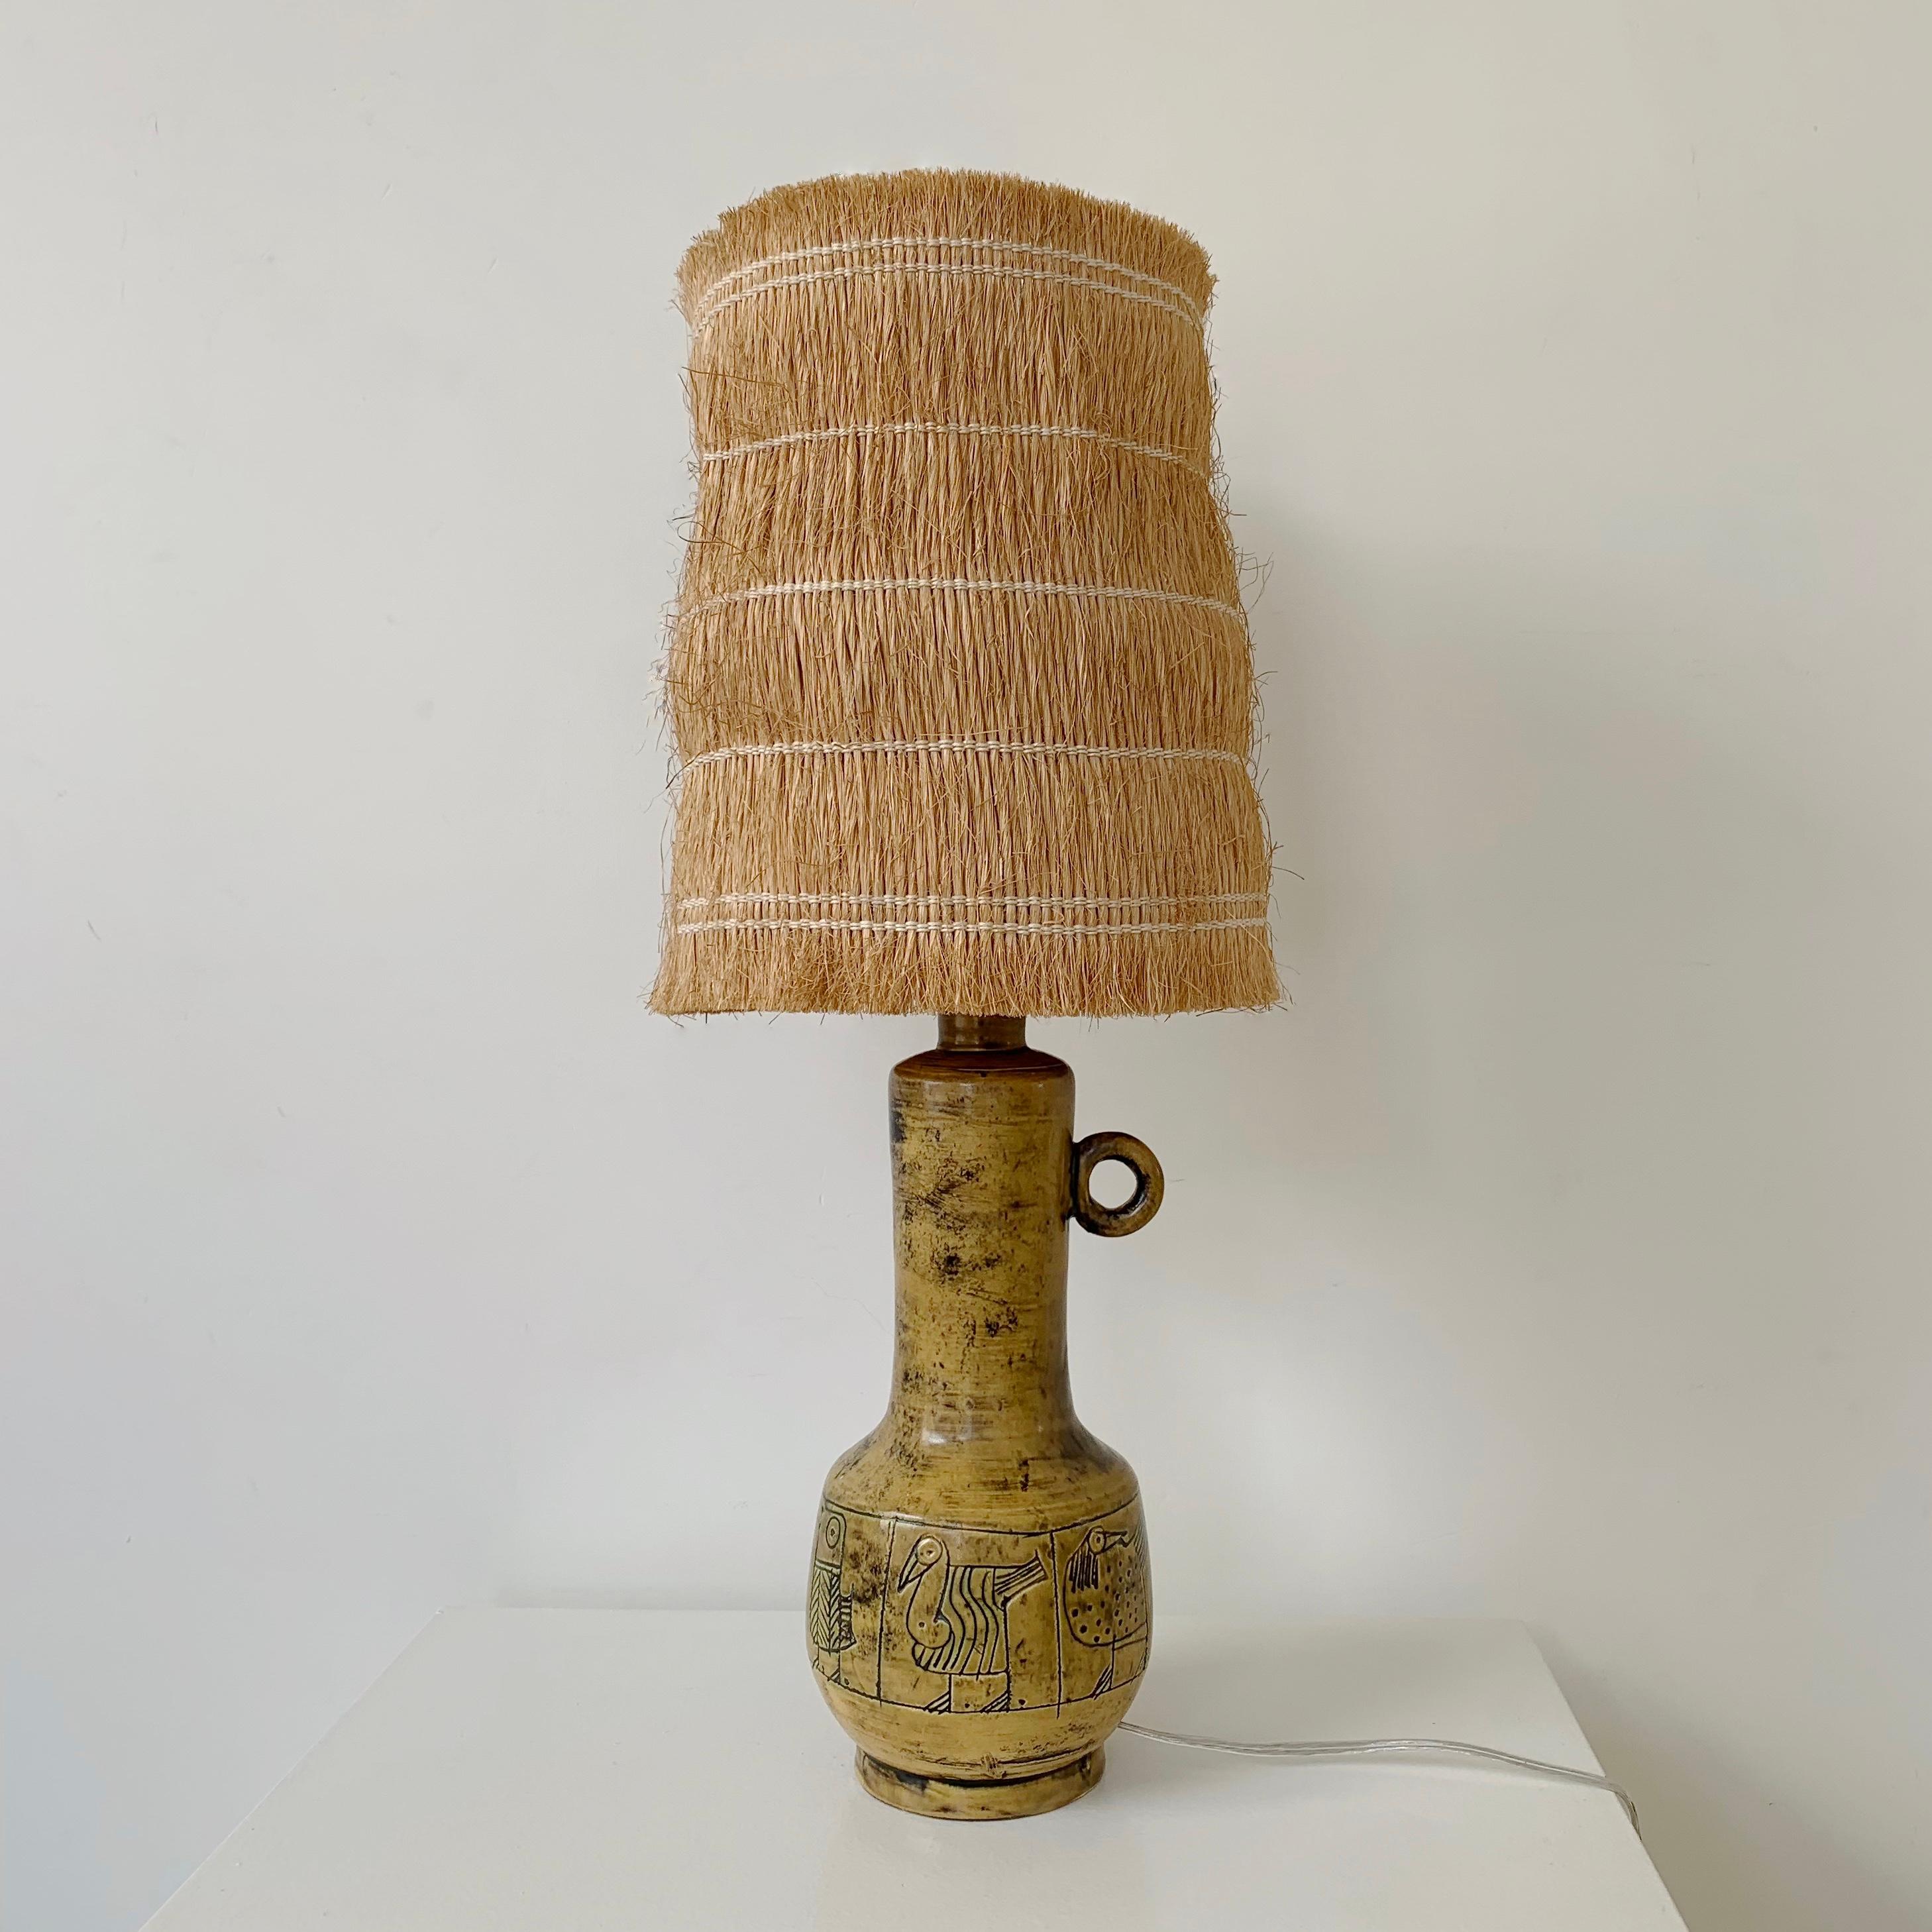 Nice Jaques Blin ceramic table lamp, circa 1950, France.
Glazed ceramic with round handle and naive birds decor.
Original straw shade included. Signed underneath: Blin.
Rewired, one E14 bulb.
Dimensions: total height: 47 cm, diameter of the